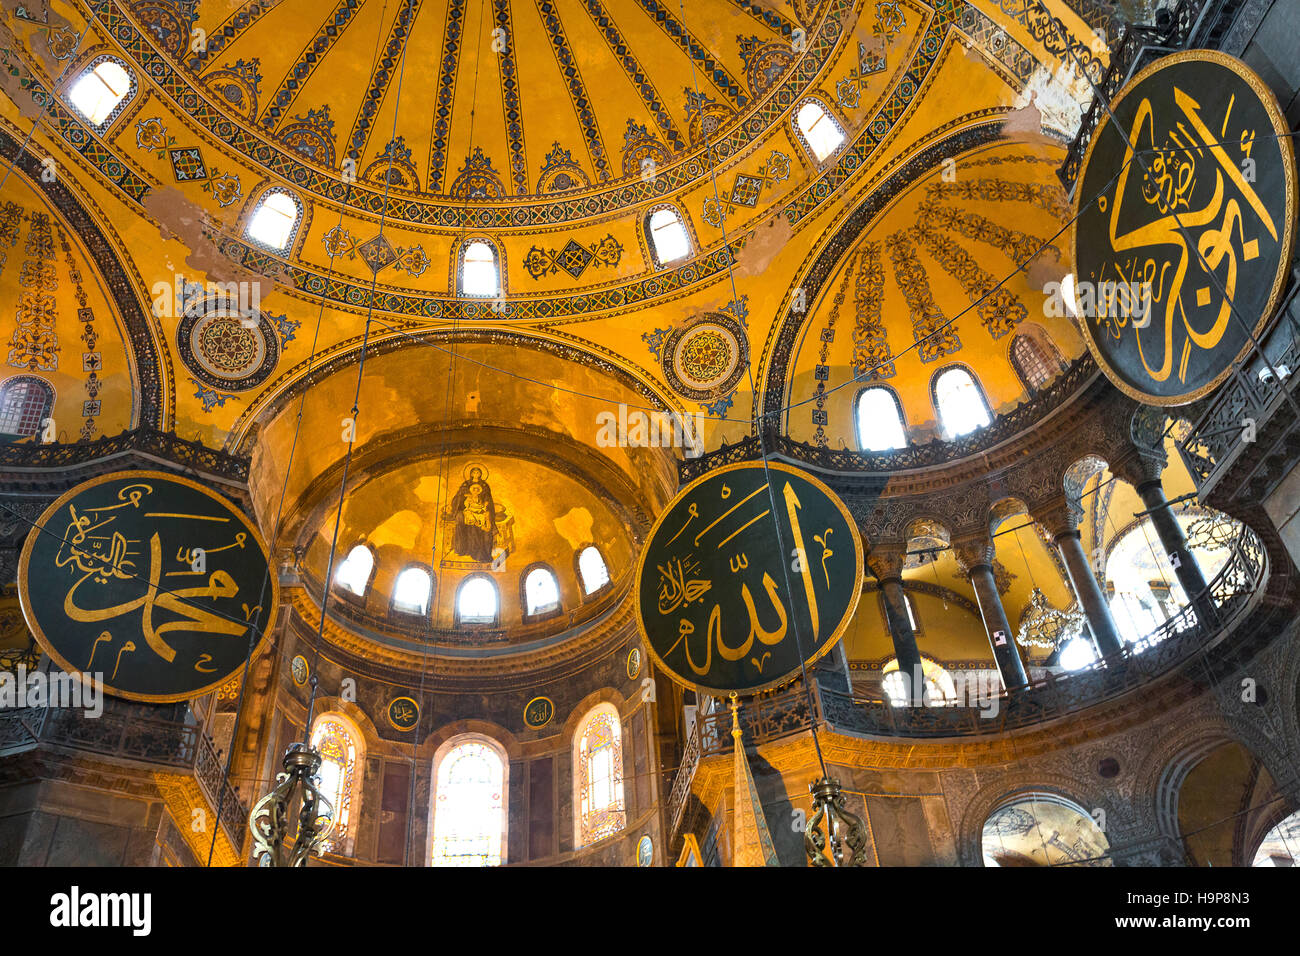 Domes and arabic inscriptions inside the Museum Church of Hagia Sophia, in Istanbul, Turkey. Stock Photo